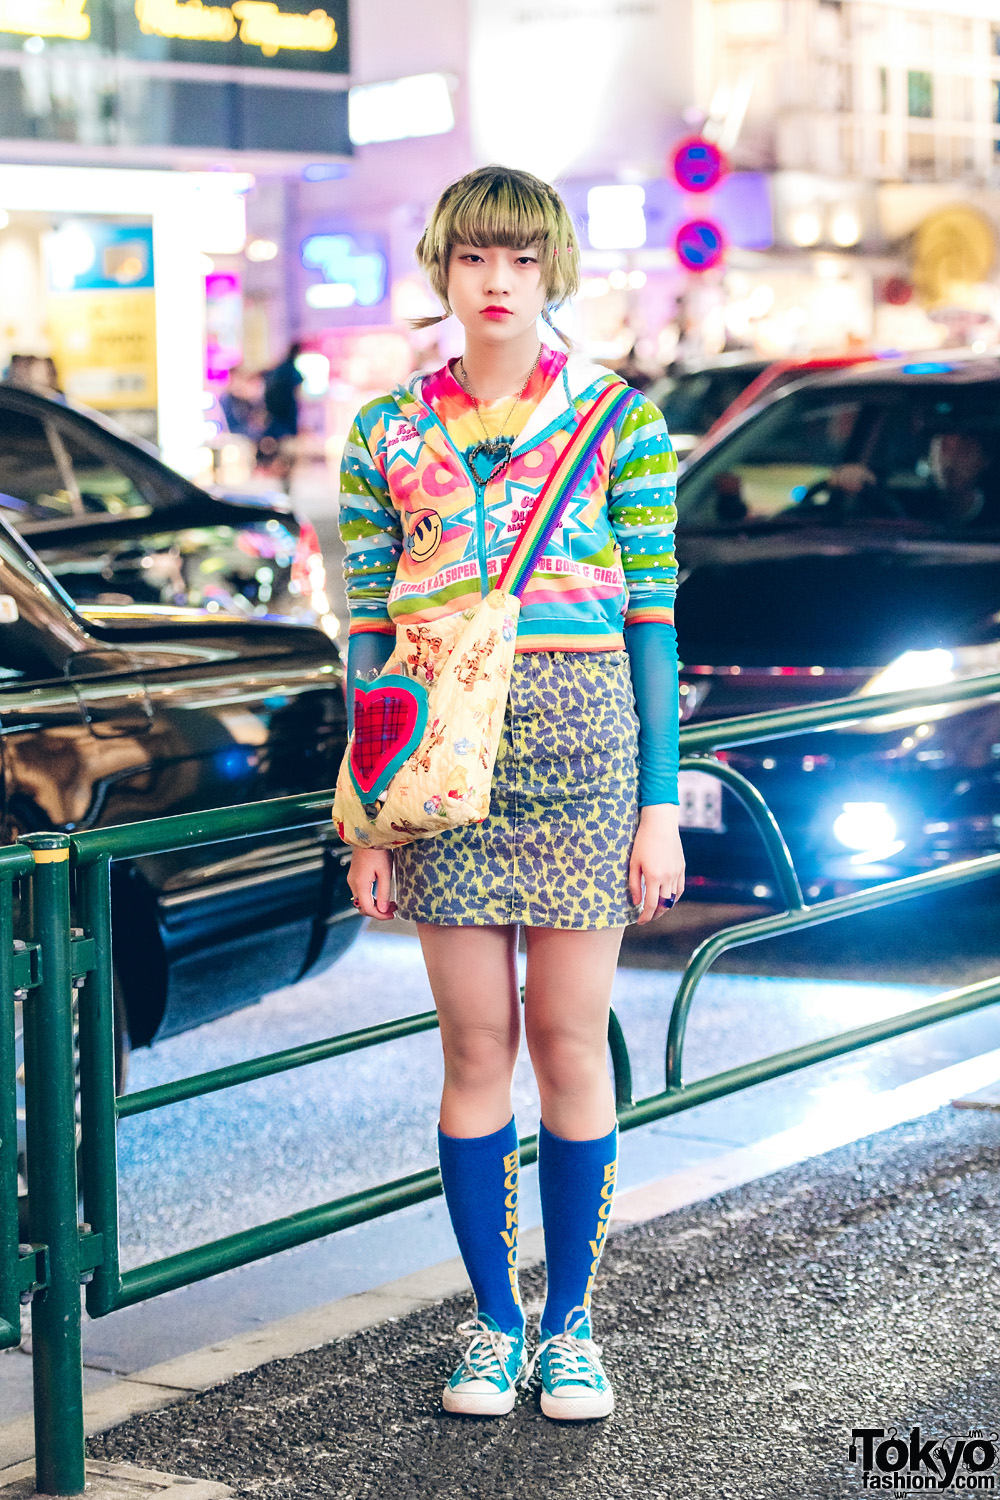 Japanese Mixed Prints Kawaii Fashion w/ K.L.C., Thank You Mart, Moussy, Converse & A Handmade Quilted Bag